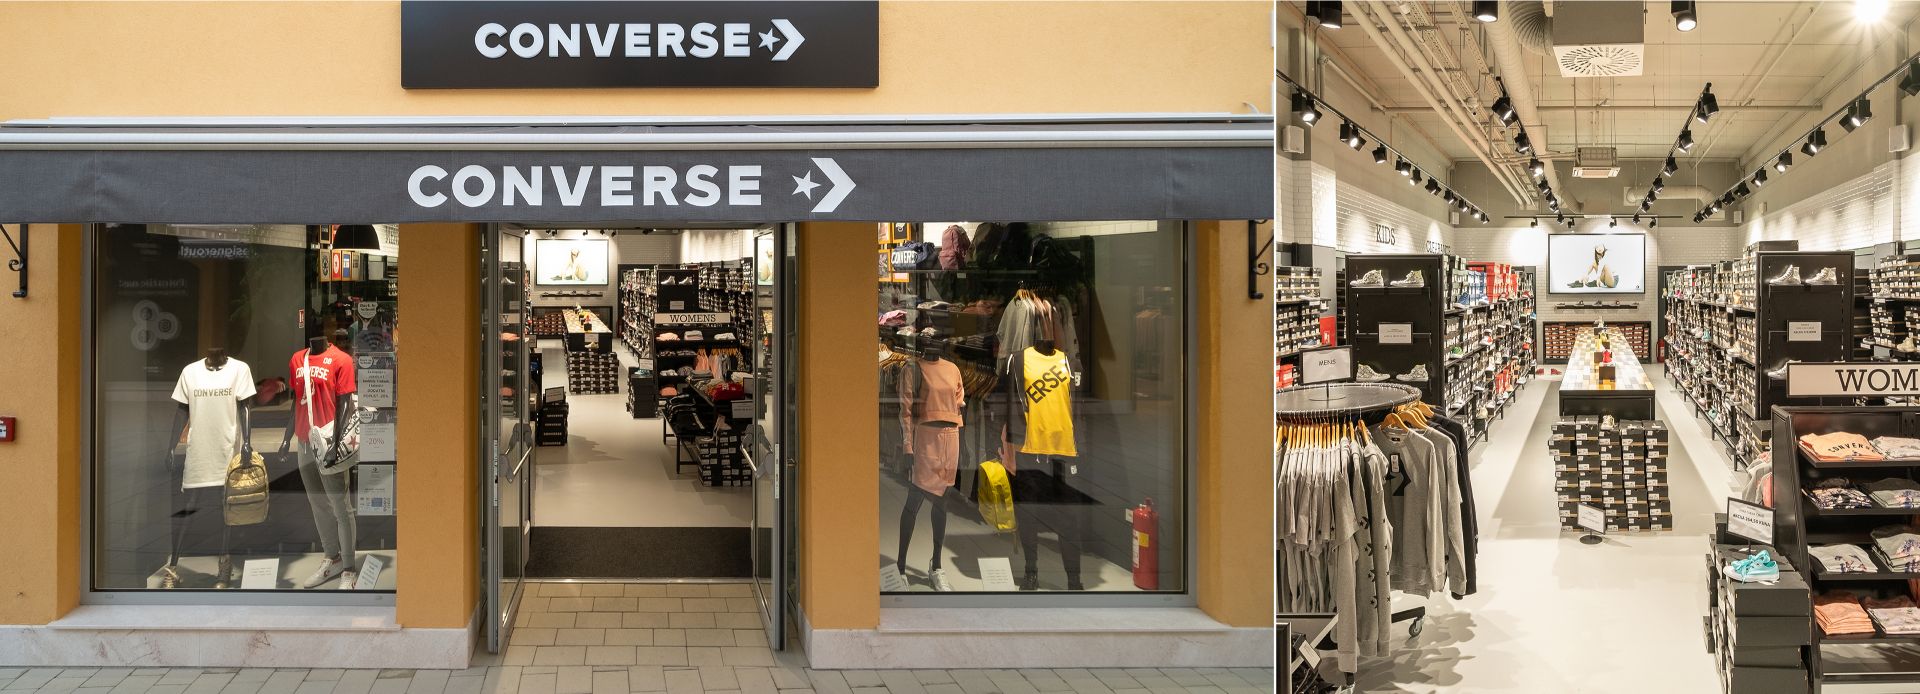 converse outlet zagreb Online Shopping for Women, Men, Kids Fashion \u0026  Lifestyle|Free Delivery \u0026 Returns! -